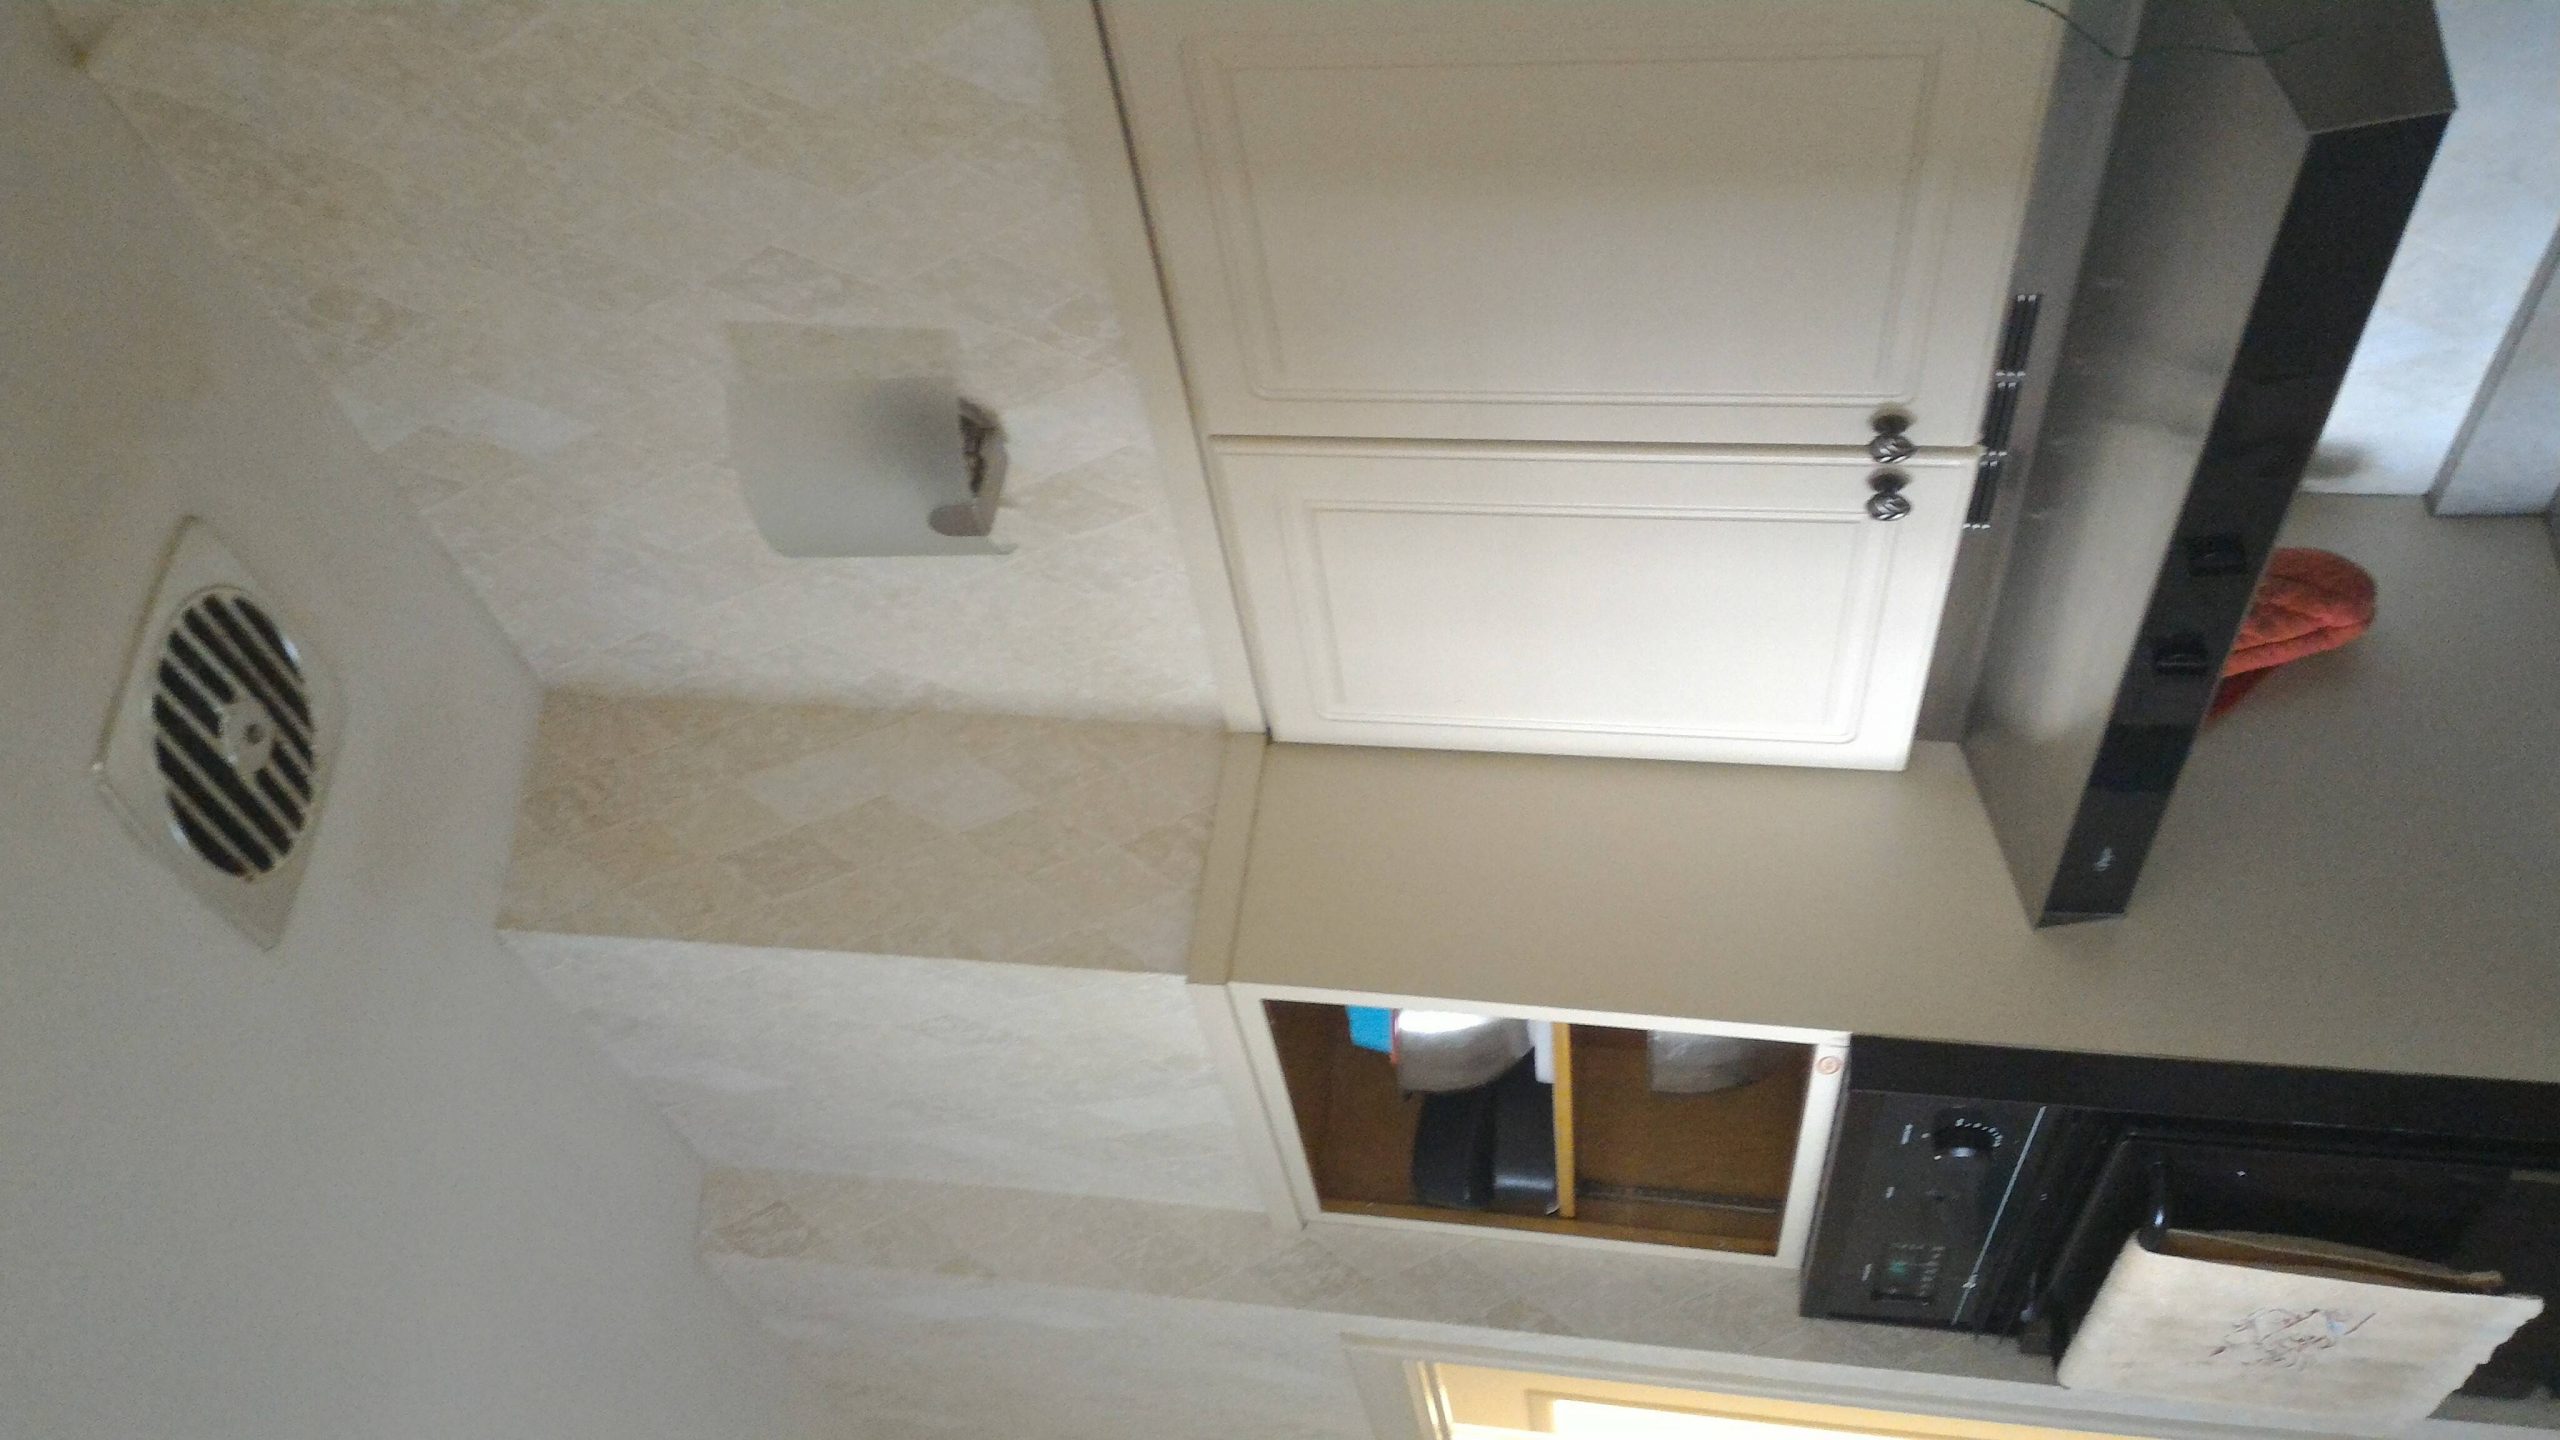 Ceiling Exhaust Fan In Kitchen Home Improvement Stack Exchange in size 4096 X 2304